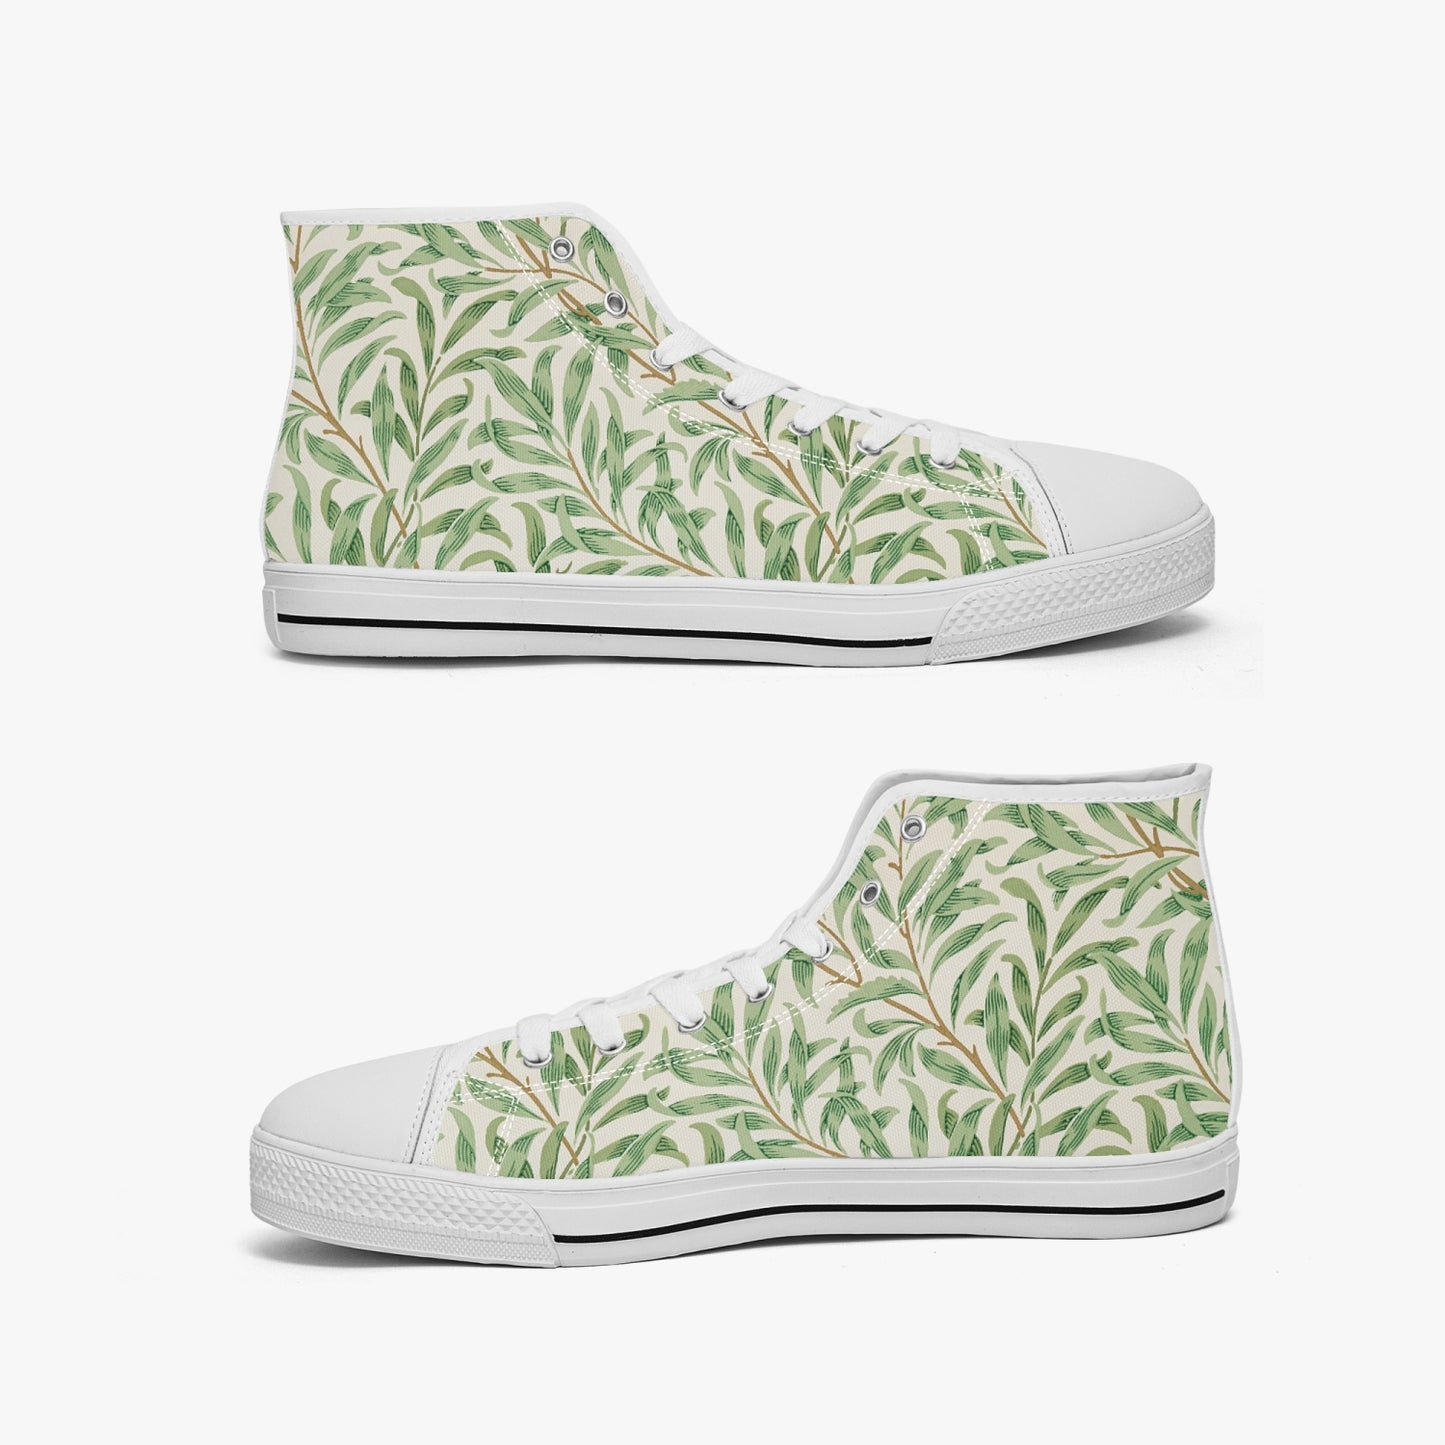 Flowered Sneakers: Canvas High-Tops with Willow Boughs William Morris Wallpaper Design